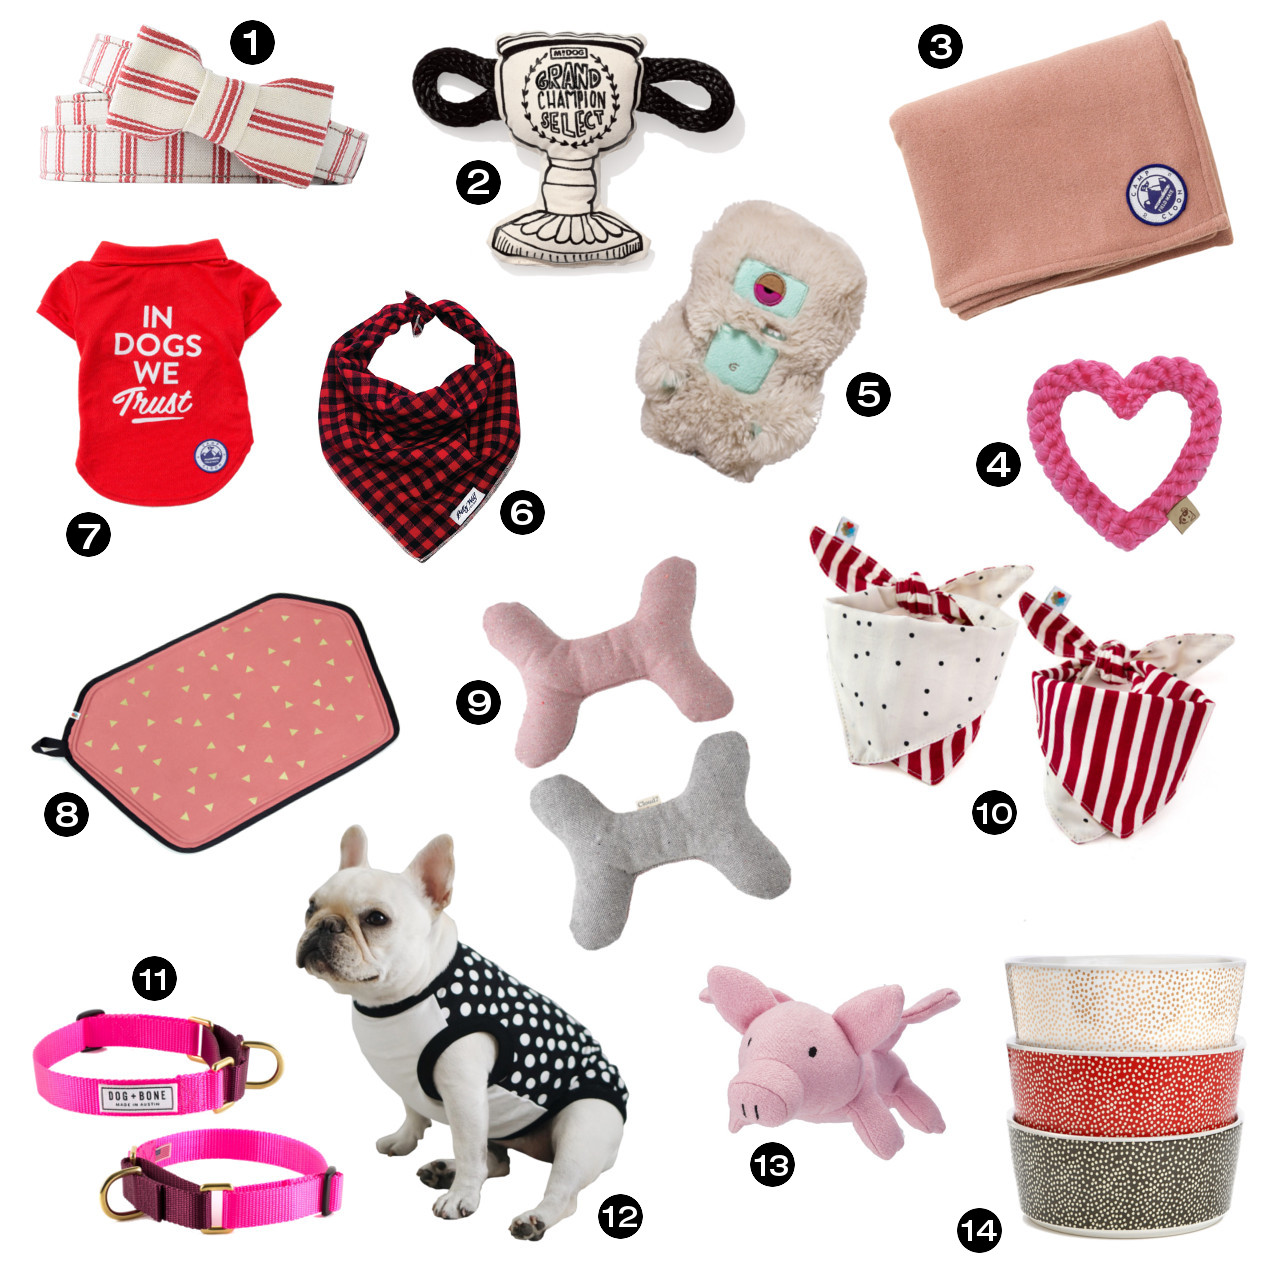 25 Valentine’s Day Gifts for Dogs